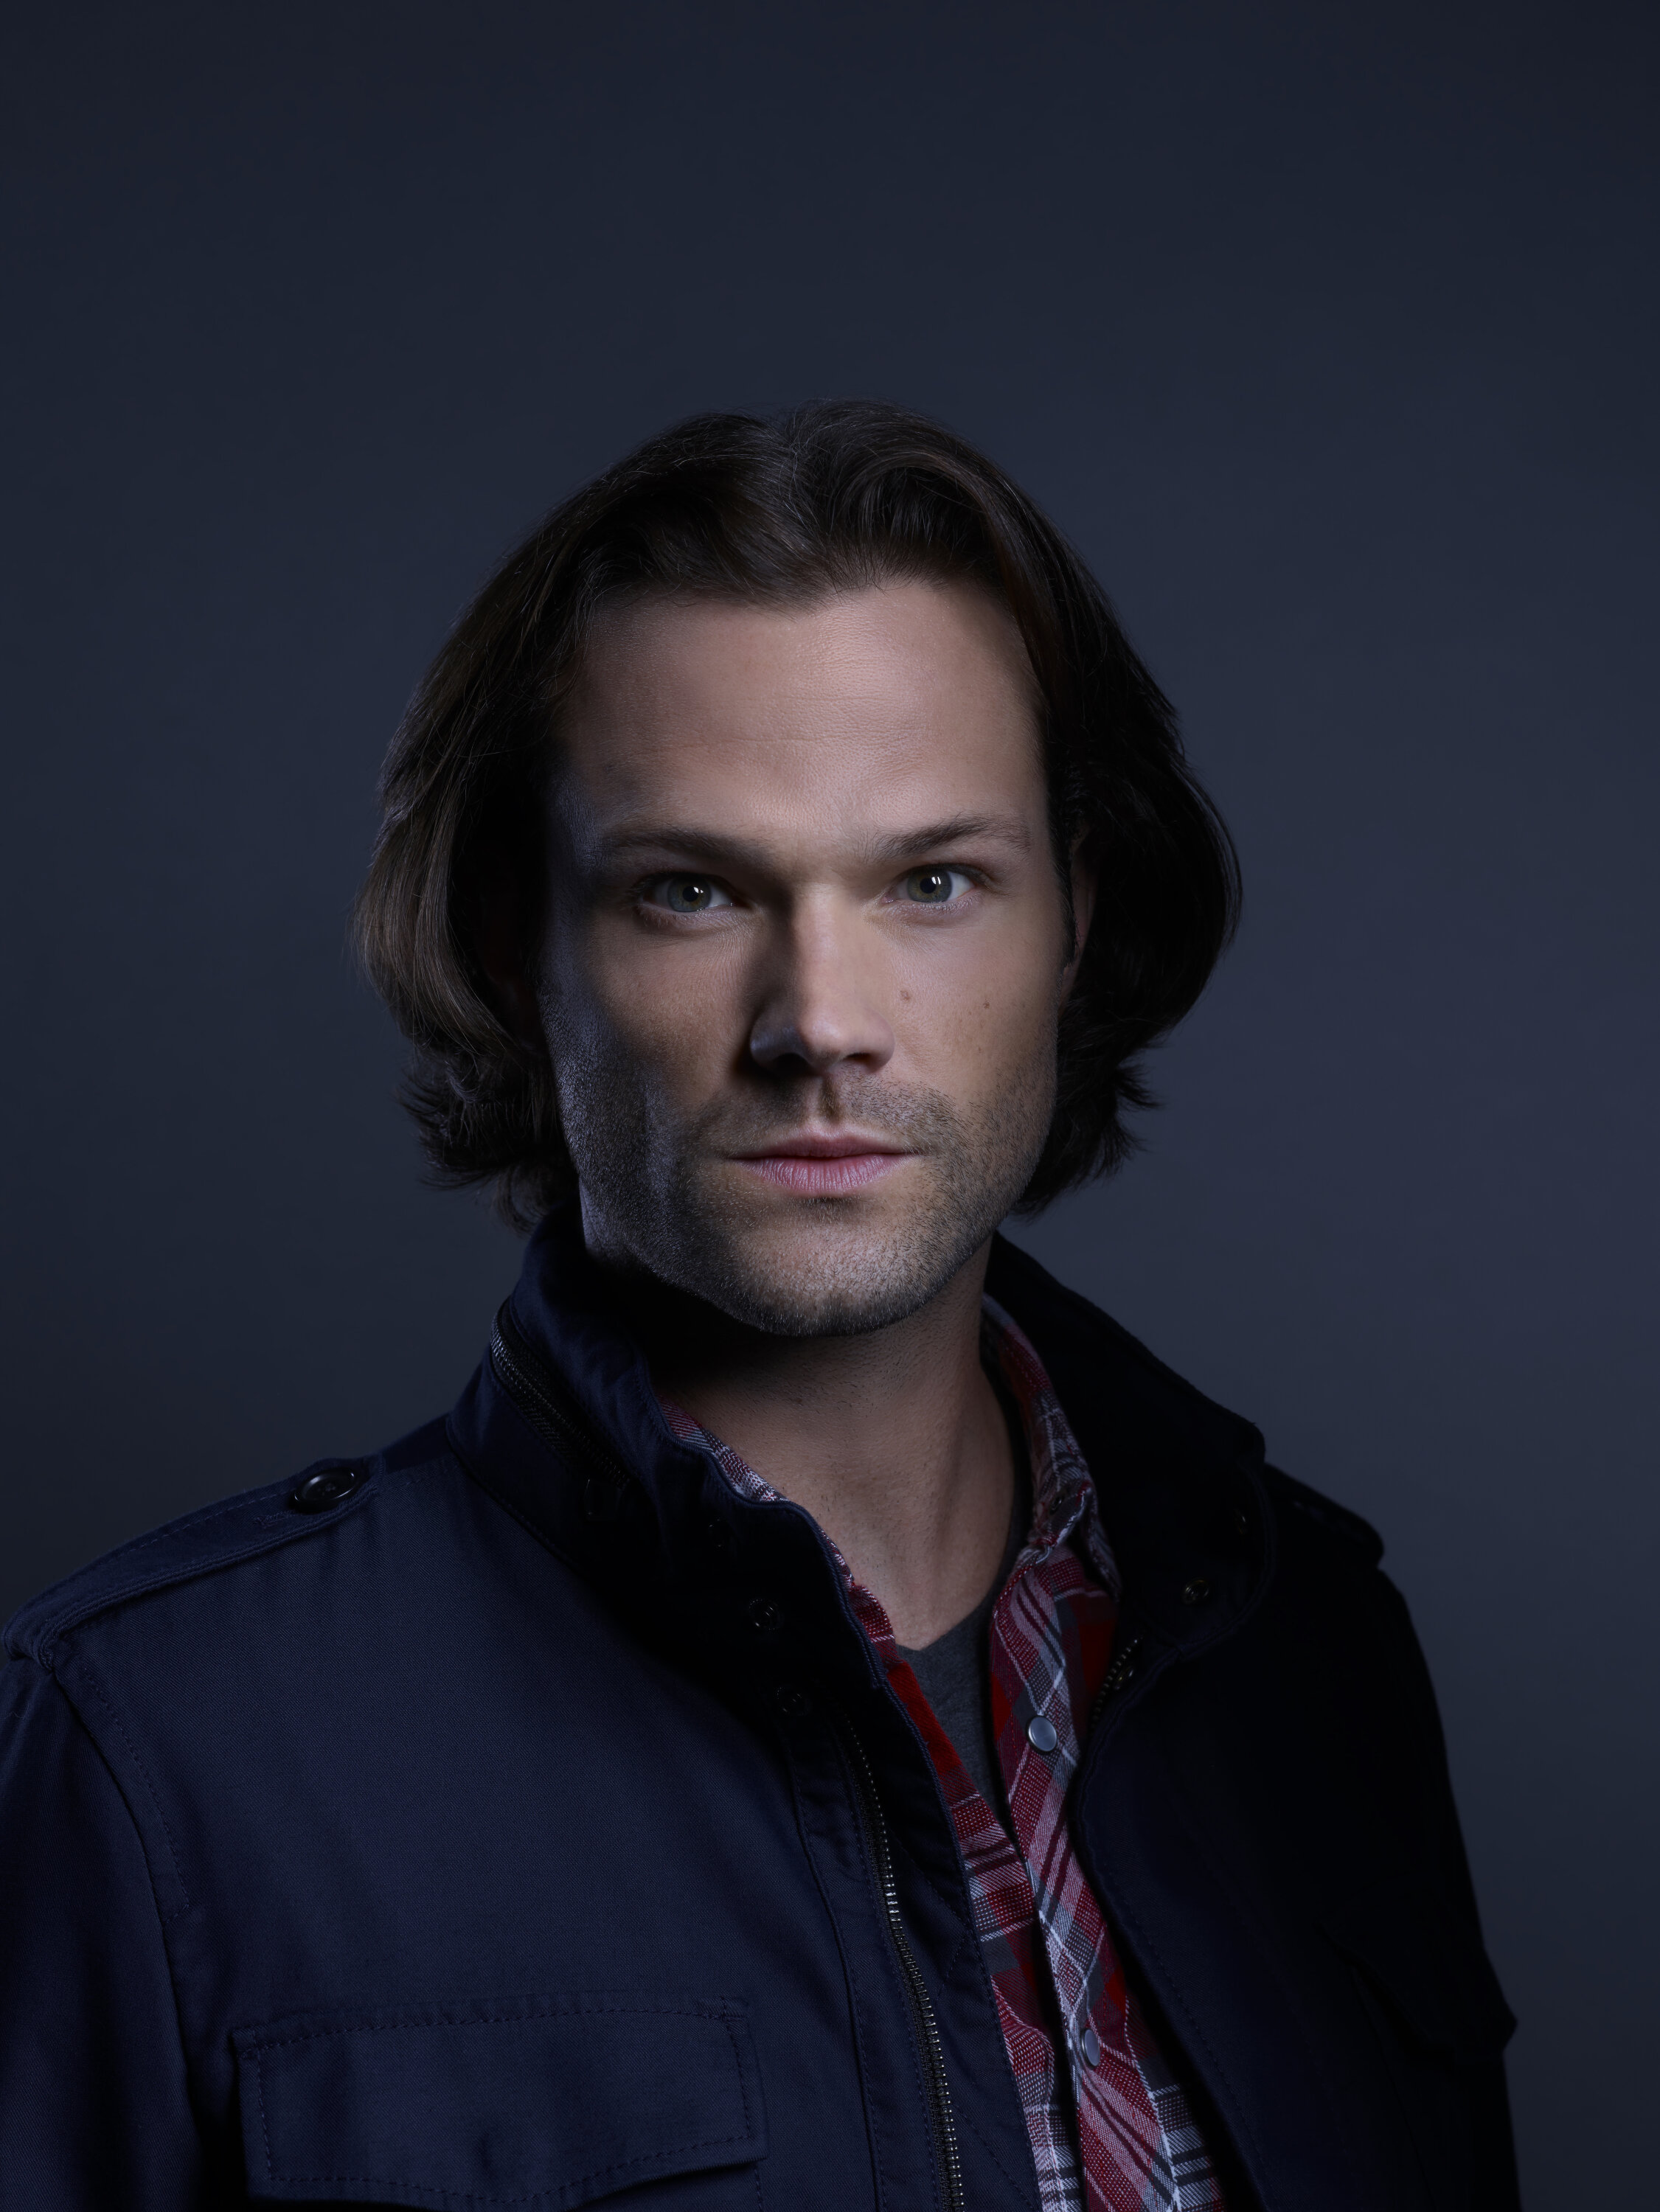 Promotional Material for "Supernatural"